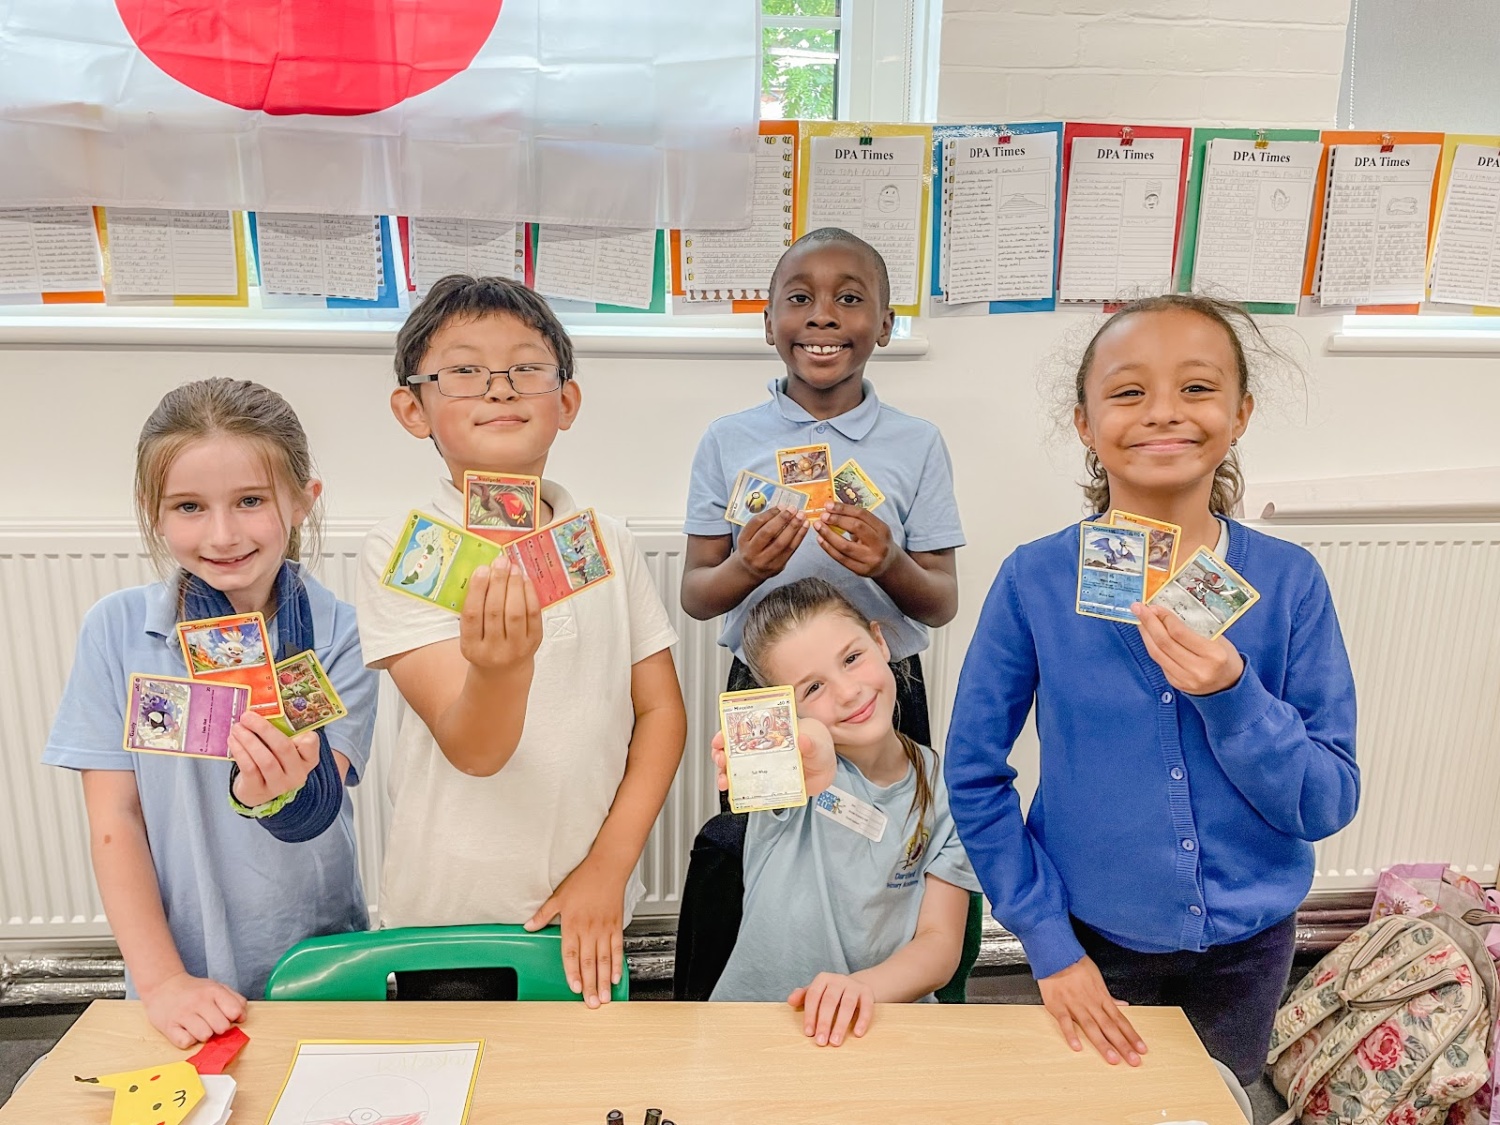 A group of five pupils are pictured smiling together for the camera, holding up some Pokemon cards they have been playing with.